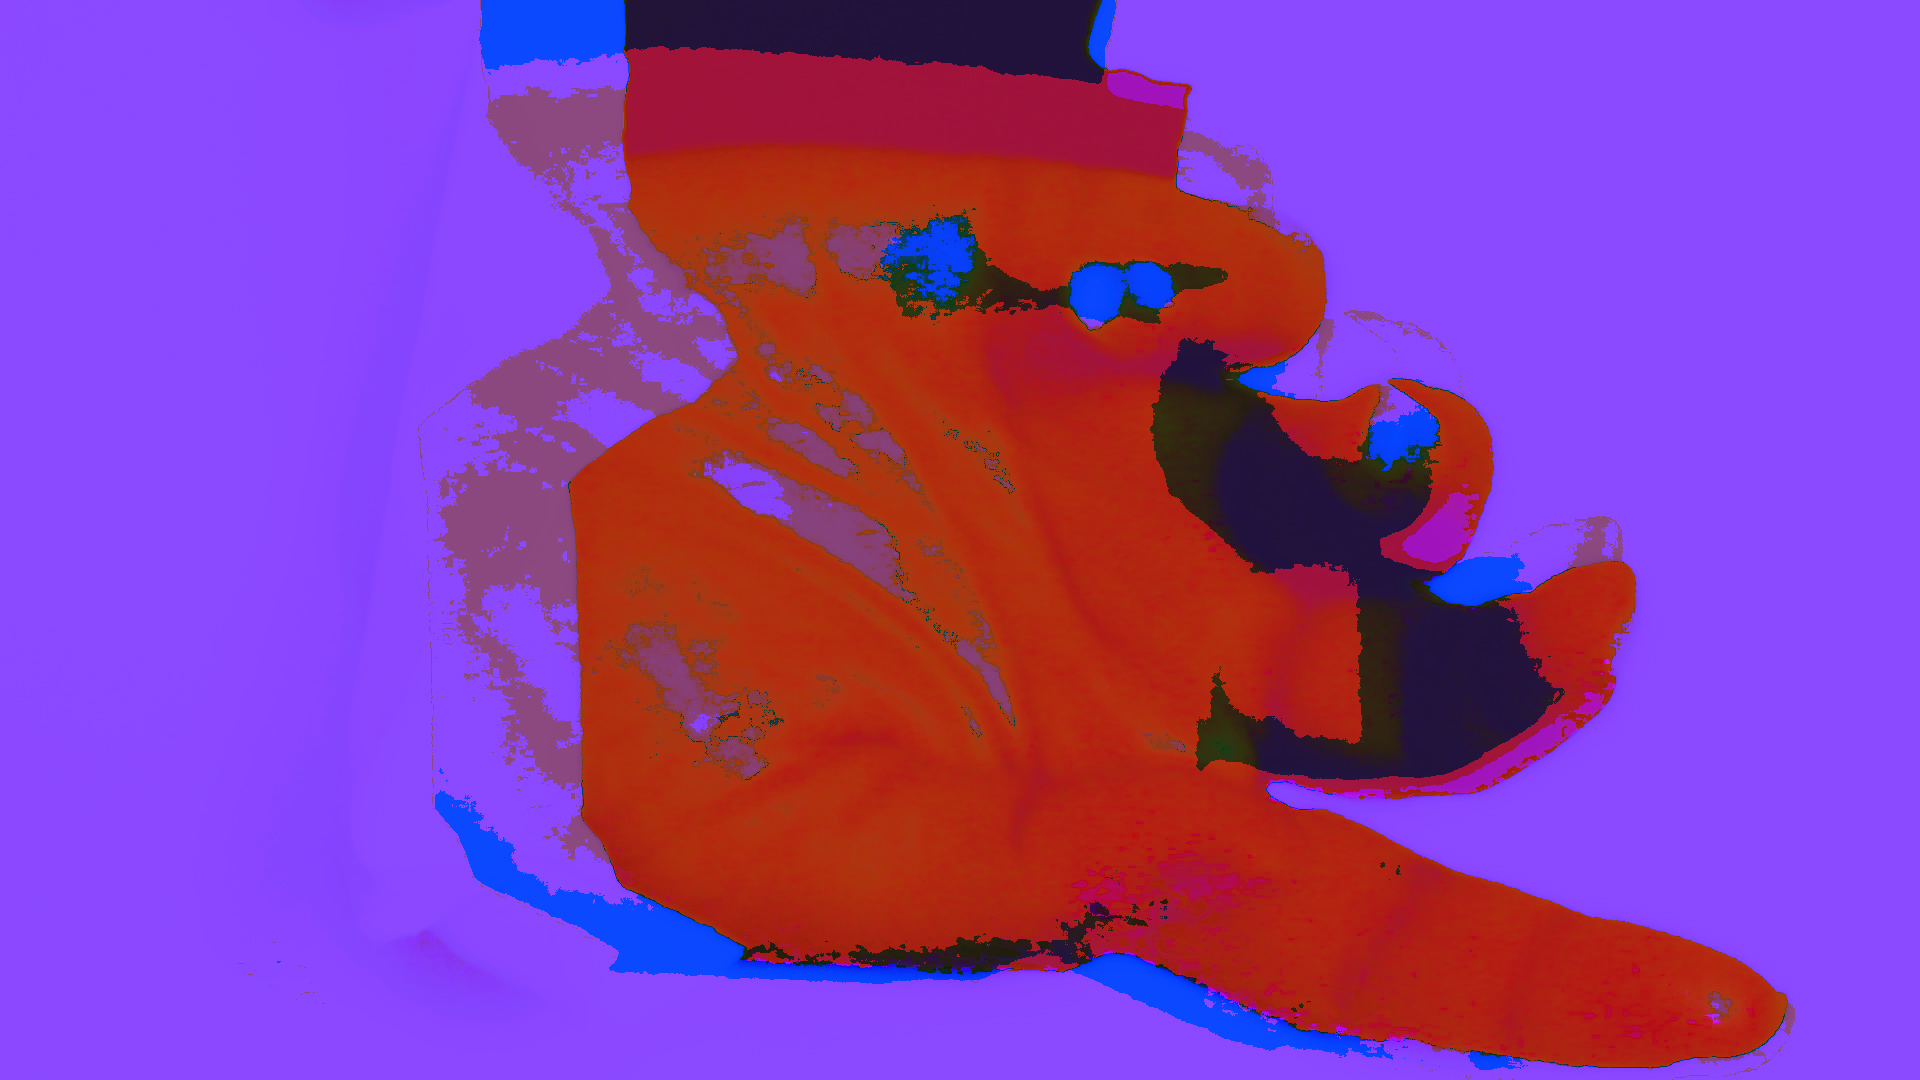 A digitally processed image showing part of a hand, palm-side up with index finger extended, rendered in saturated red, black, blue, mauve on a purple background.